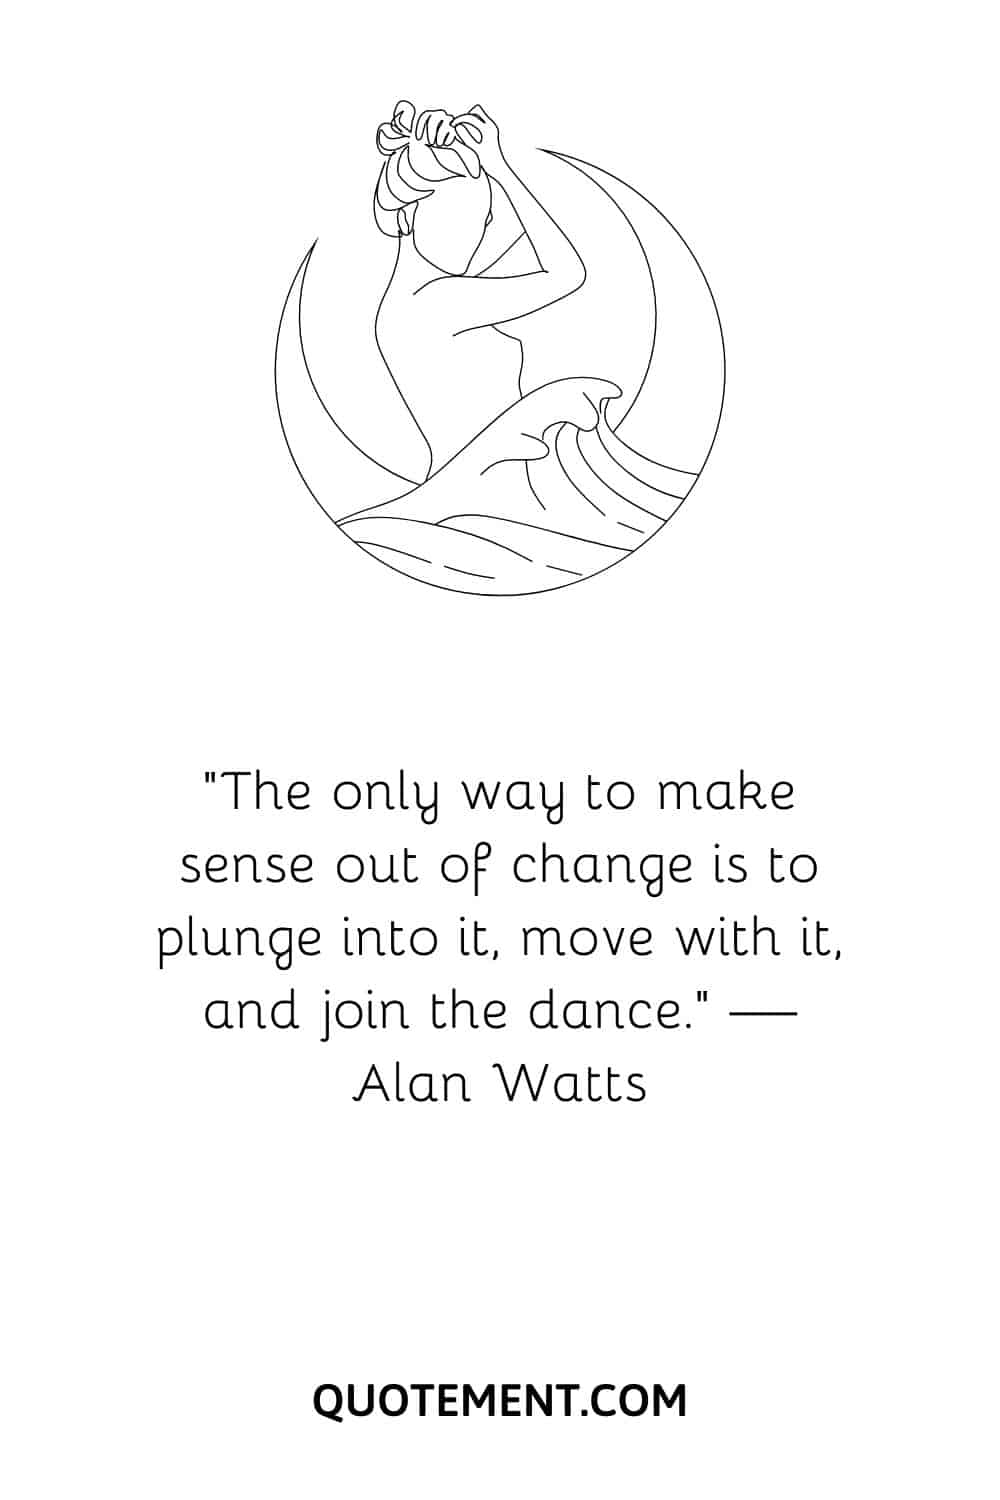 “The only way to make sense out of change is to plunge into it, move with it, and join the dance.” — Alan Watts